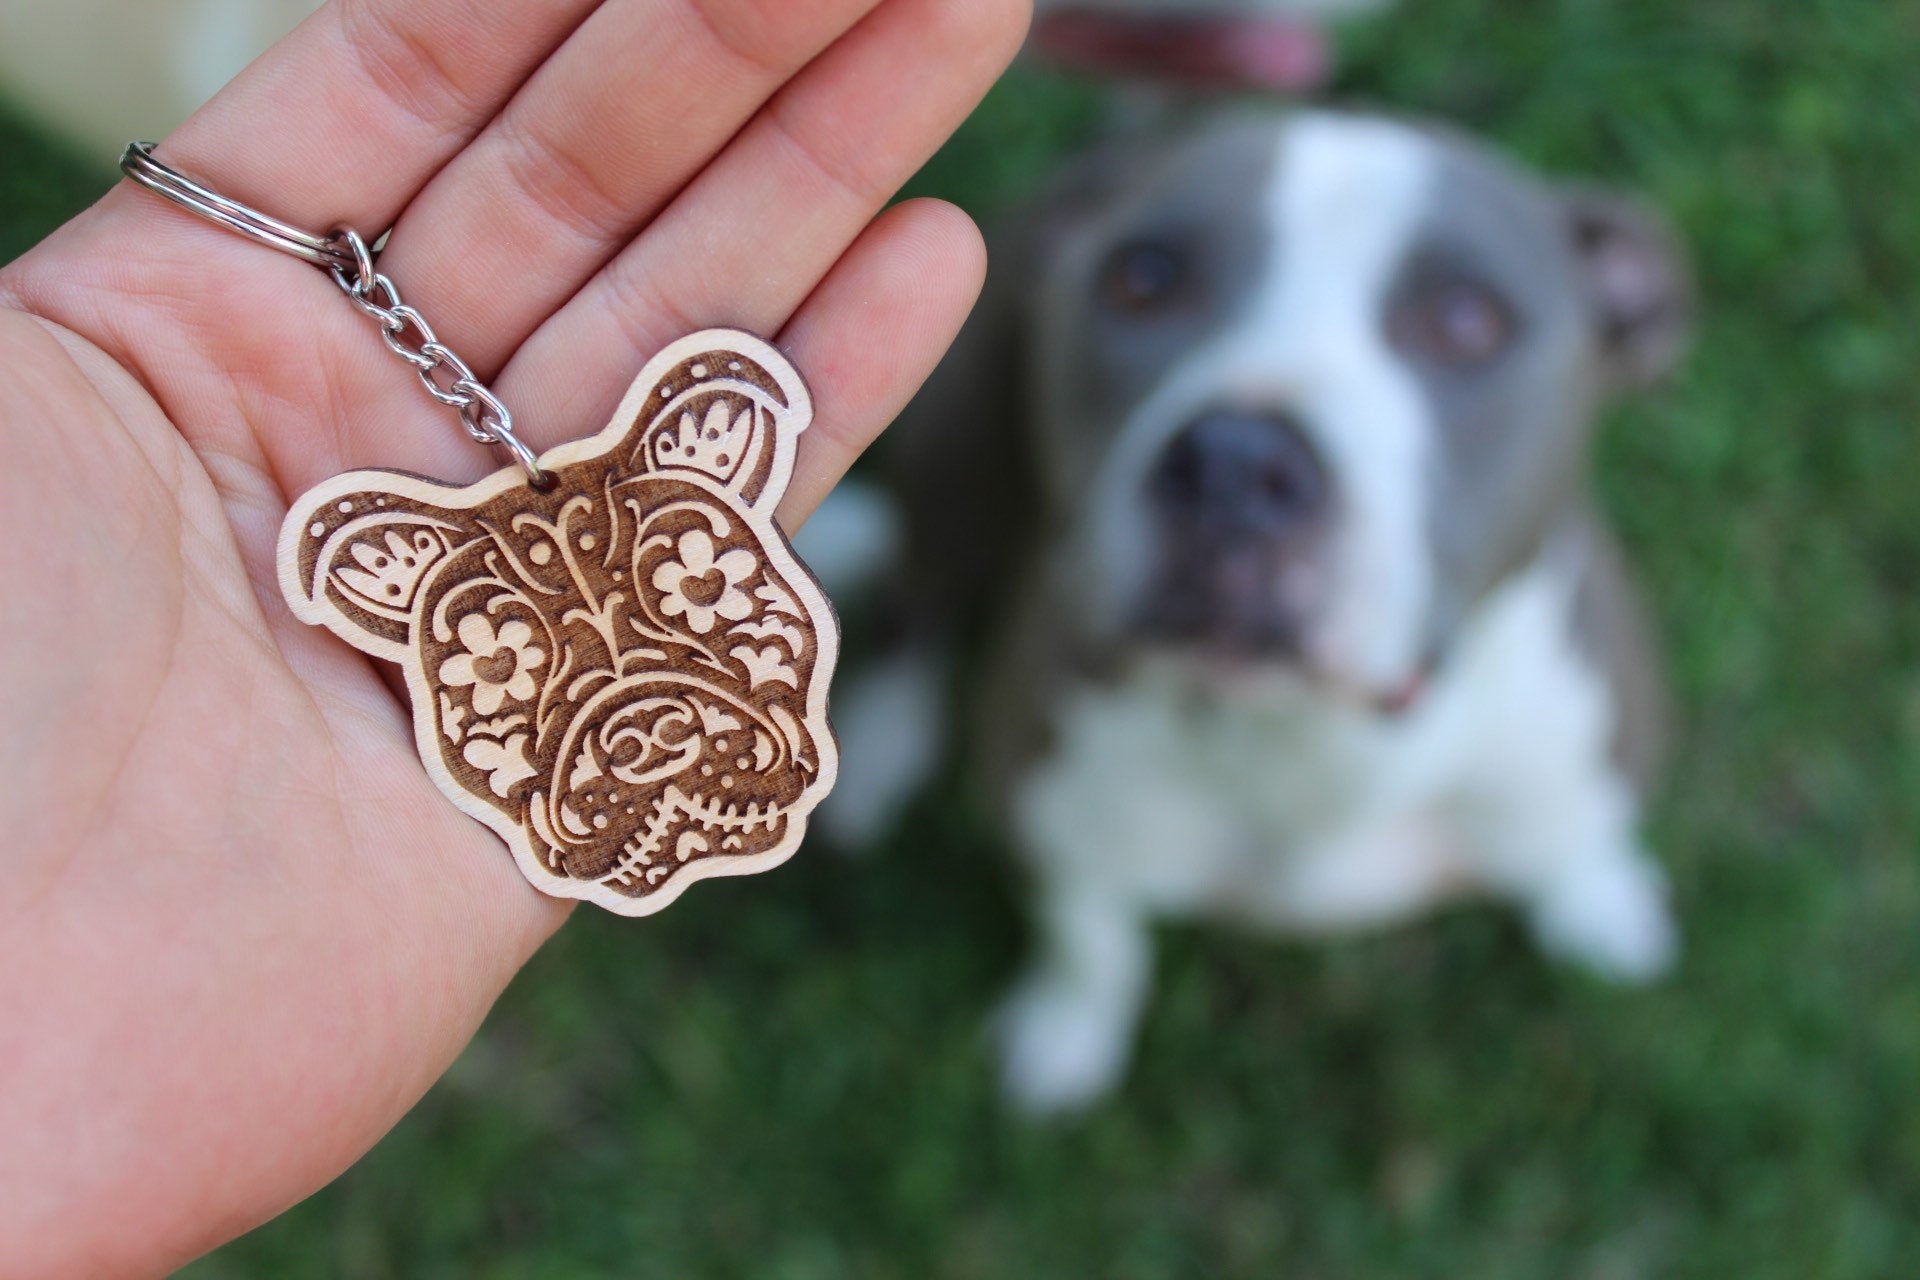 Frenchie Keychain for Dog Lovers